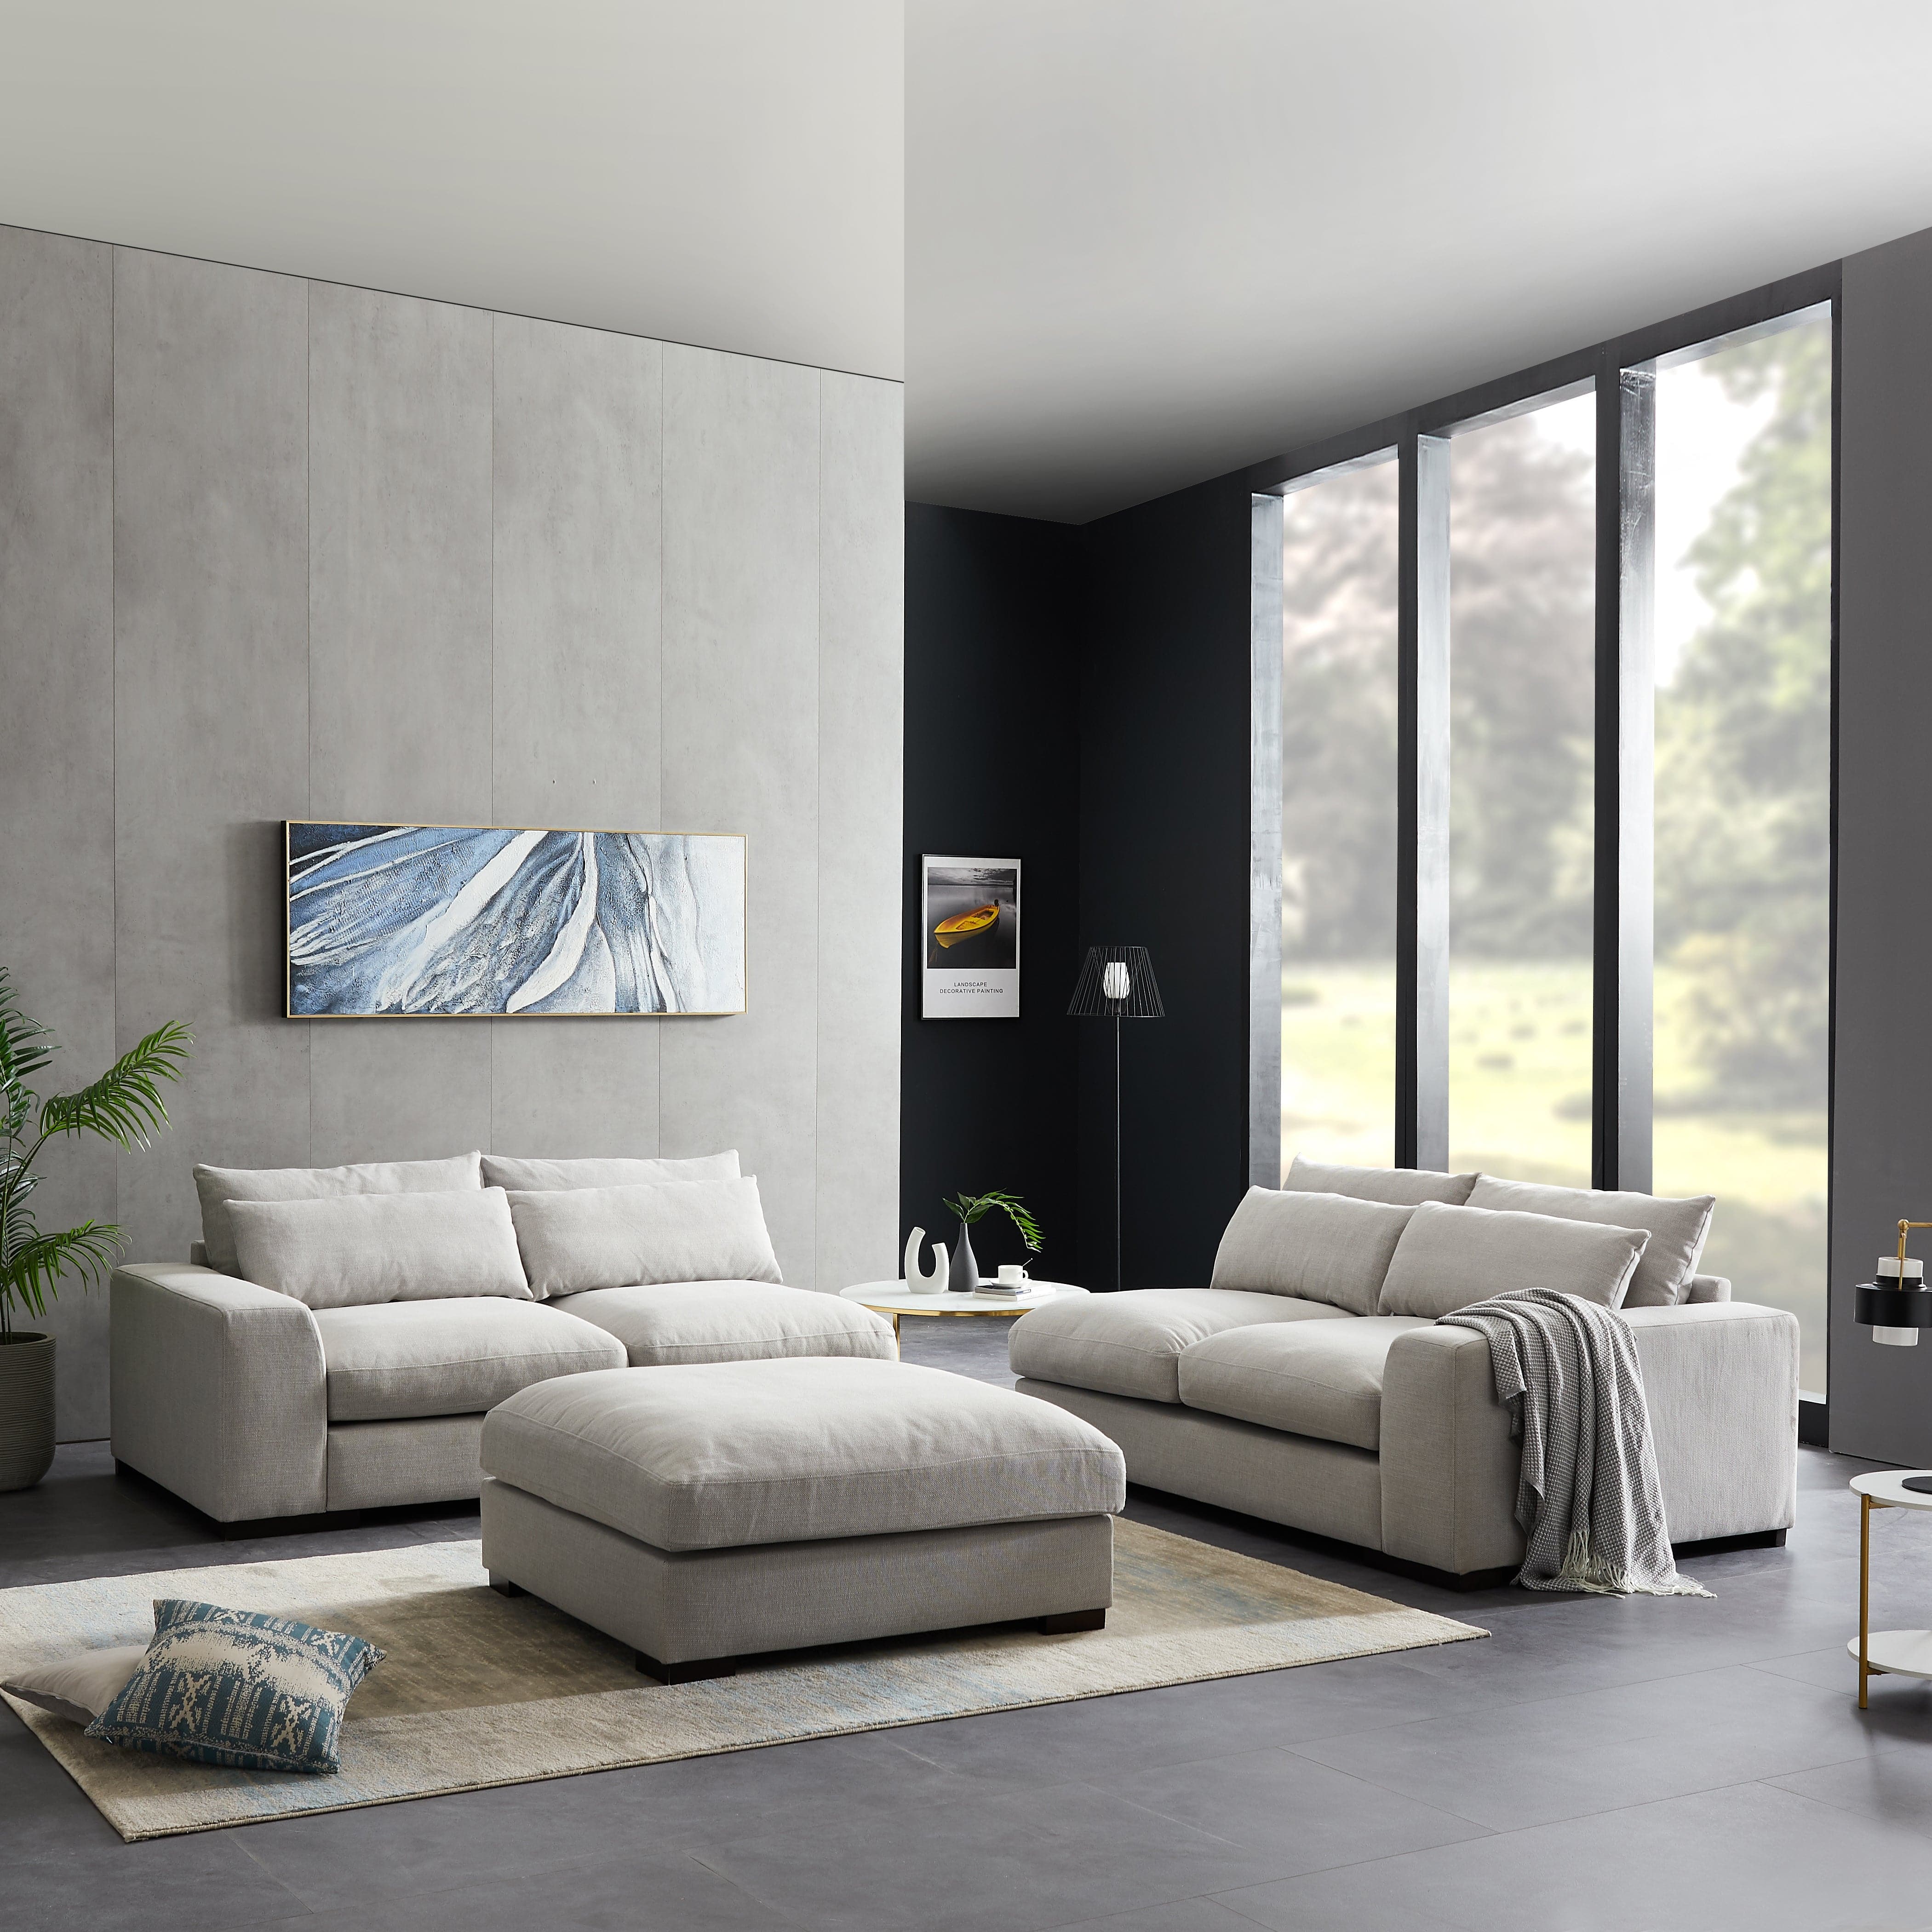 - TFC&H Co. SOFA AND COMFORTABLE SECTIONAL SOFA - LIGHT GREY- Ships from The US - sectional at TFC&H Co.